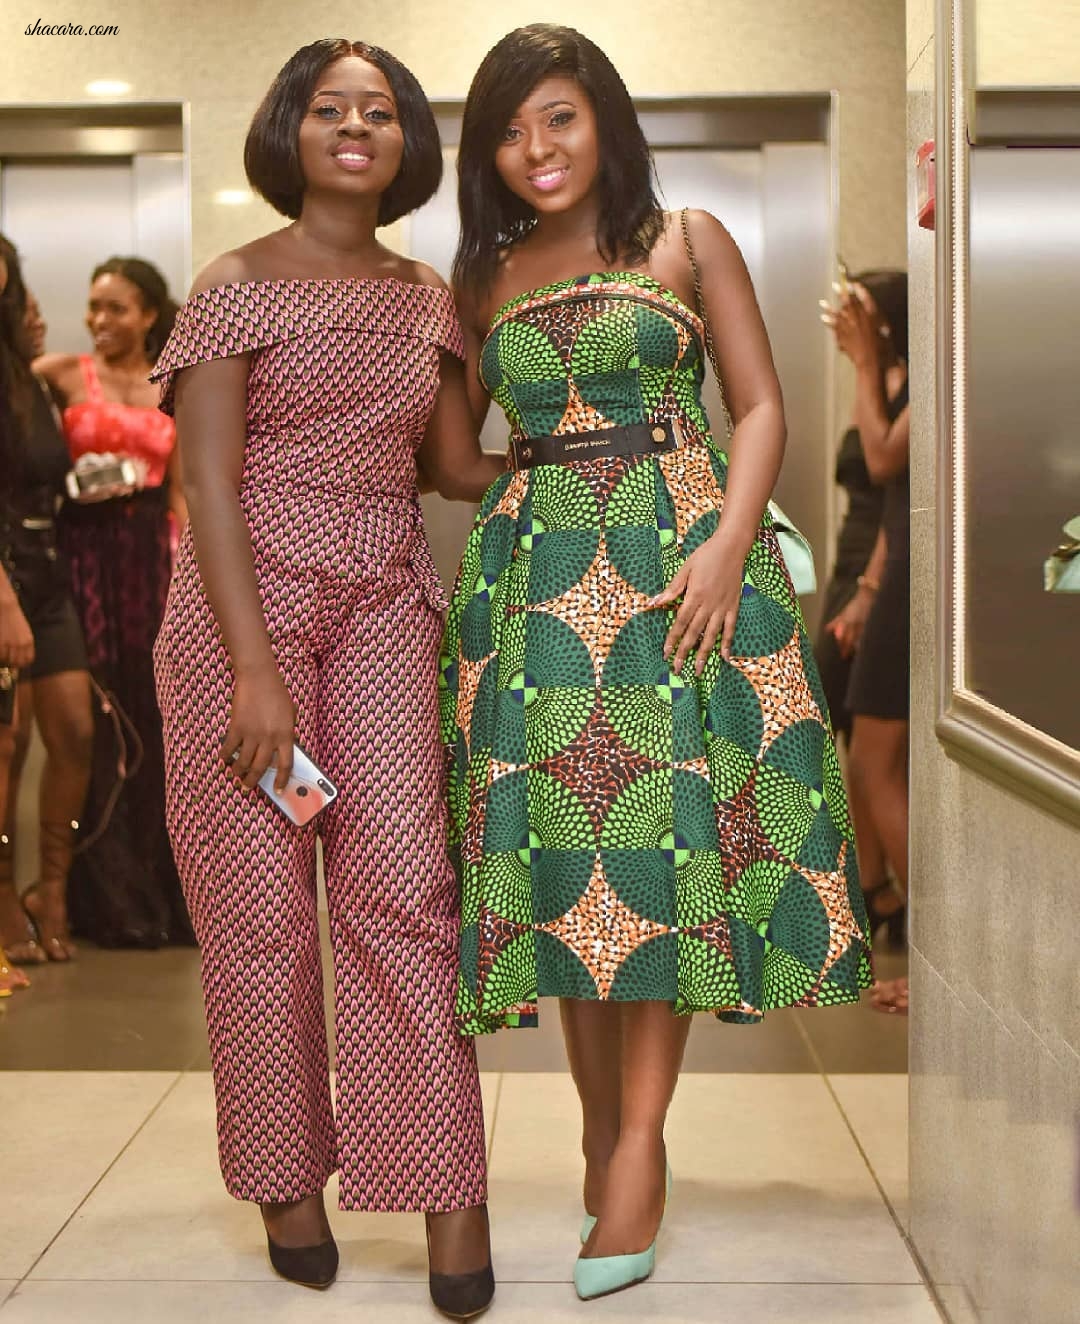 Here Is Why Mhiss Nana’s Pretty Green Dress She Wore To FashionGHANA Honors & Awards Is Still Trending